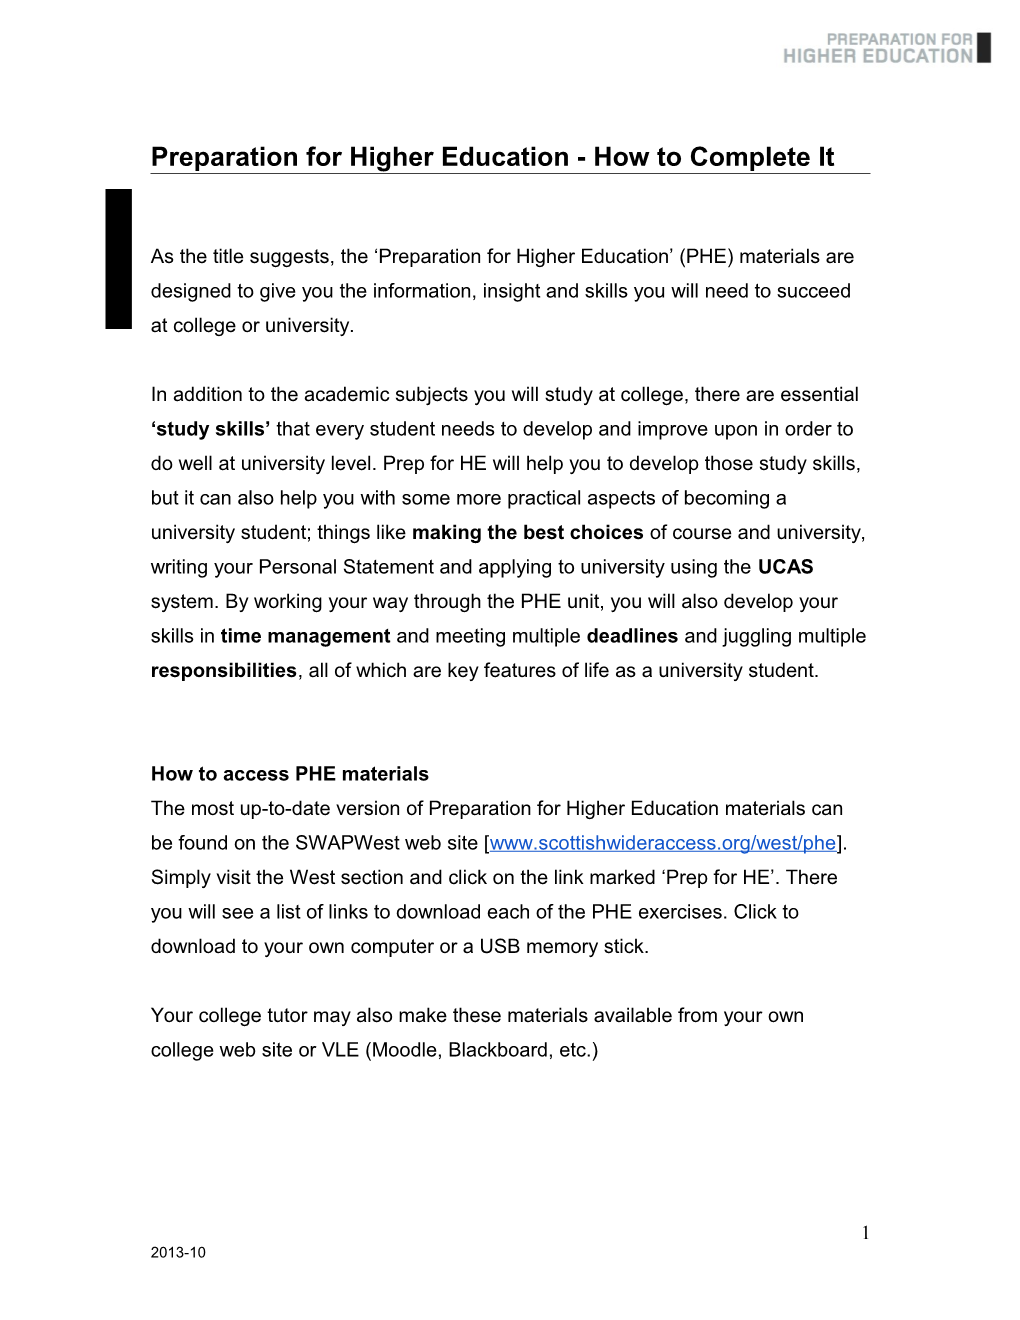 Preparation for Higher Education - How to Complete It